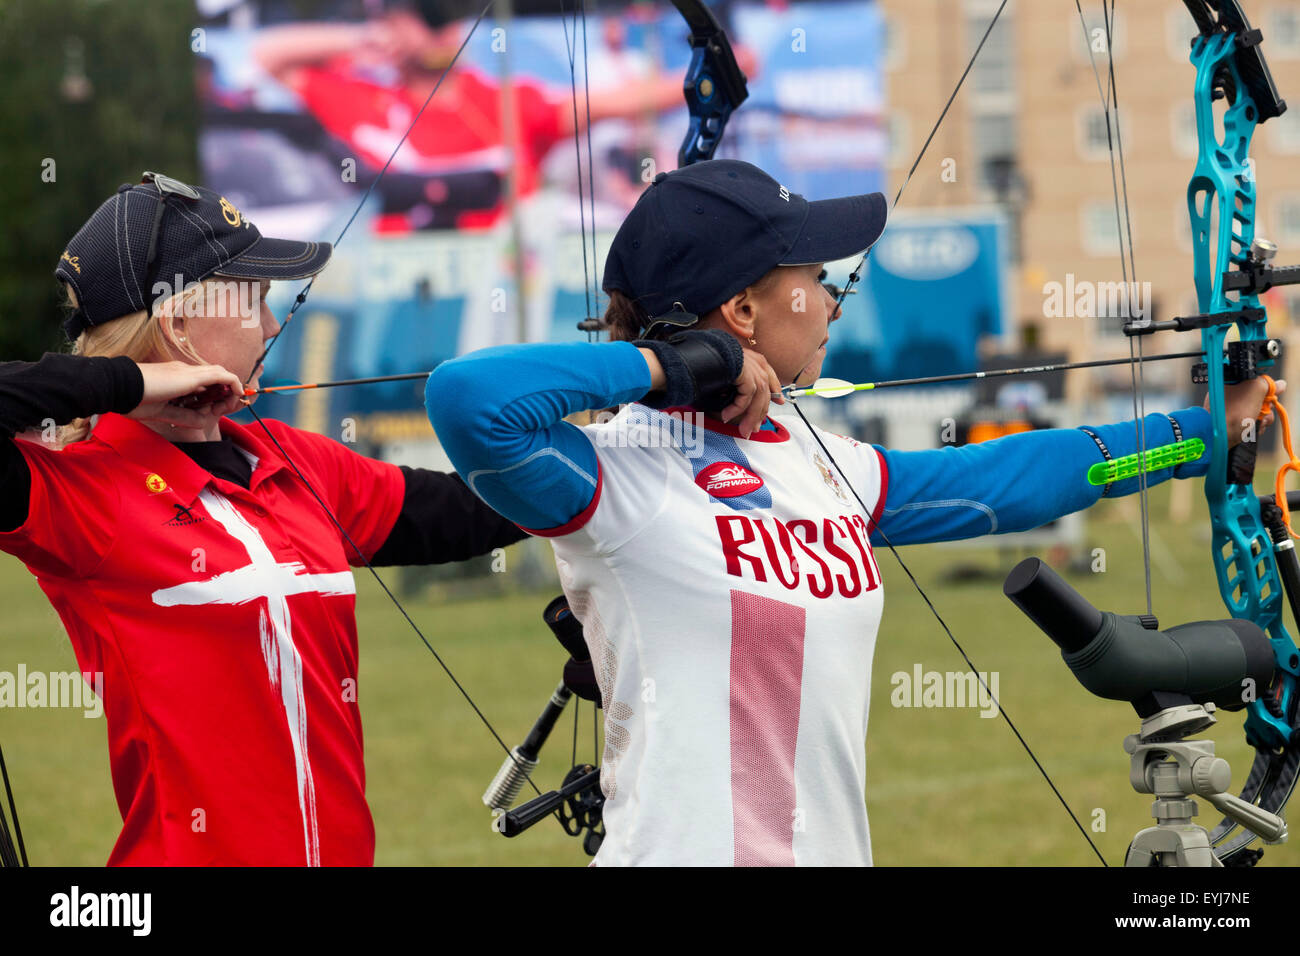 Copenhagen, Denmark, July 30th, 2015: Danish archer Sarah Holst Sonnichsen and Russian Marila Vinogradova competes in the World Archery Championships in Copenhagen during Thursday's individual matches  in compound bow. Credit:  OJPHOTOS/Alamy Live News Stock Photo